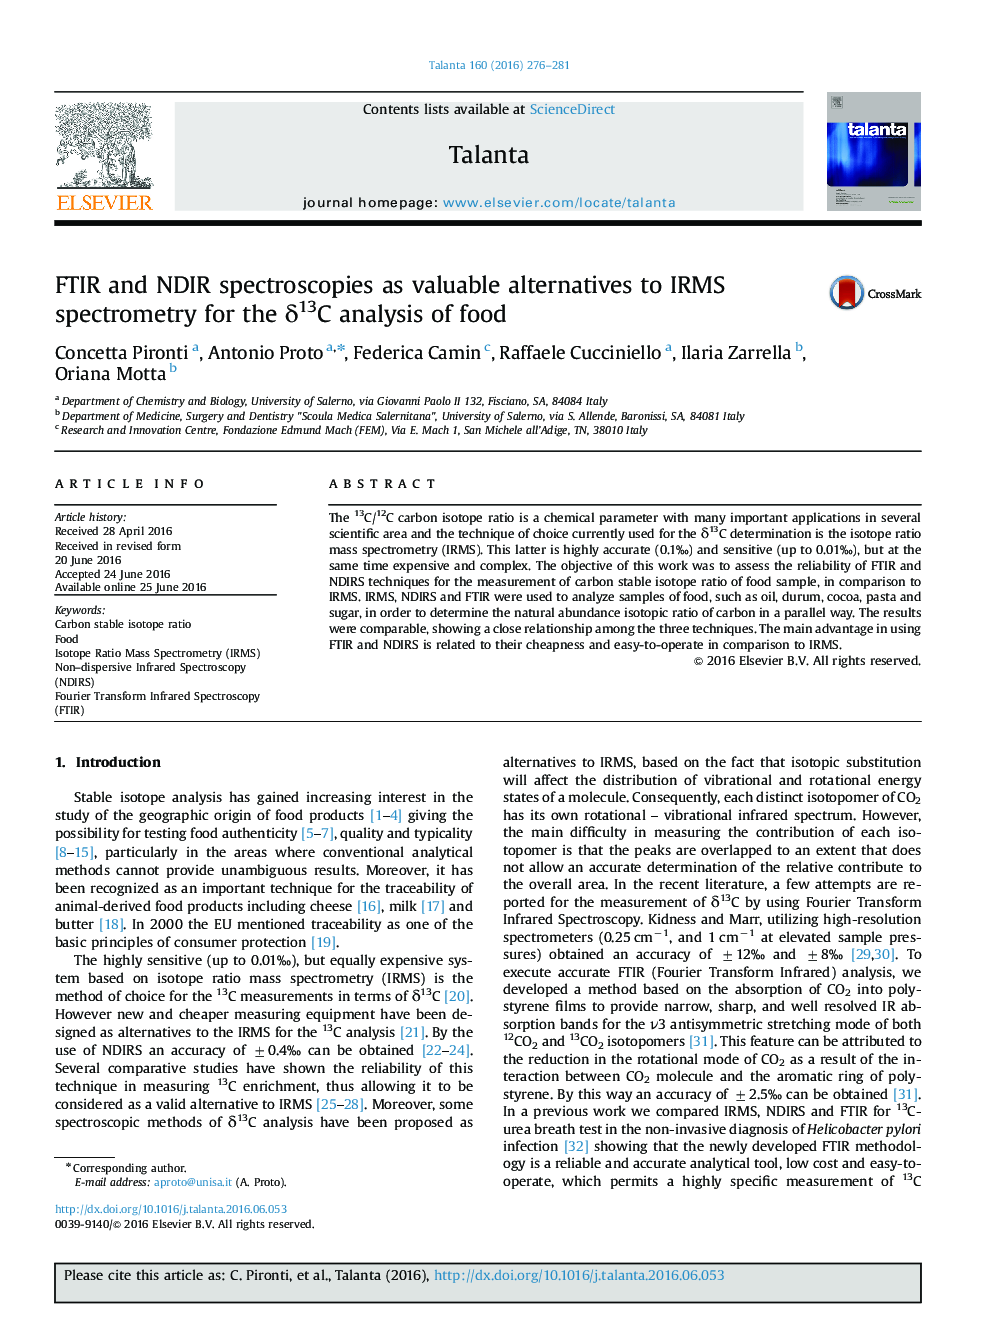 FTIR and NDIR spectroscopies as valuable alternatives to IRMS spectrometry for the δ13C analysis of food